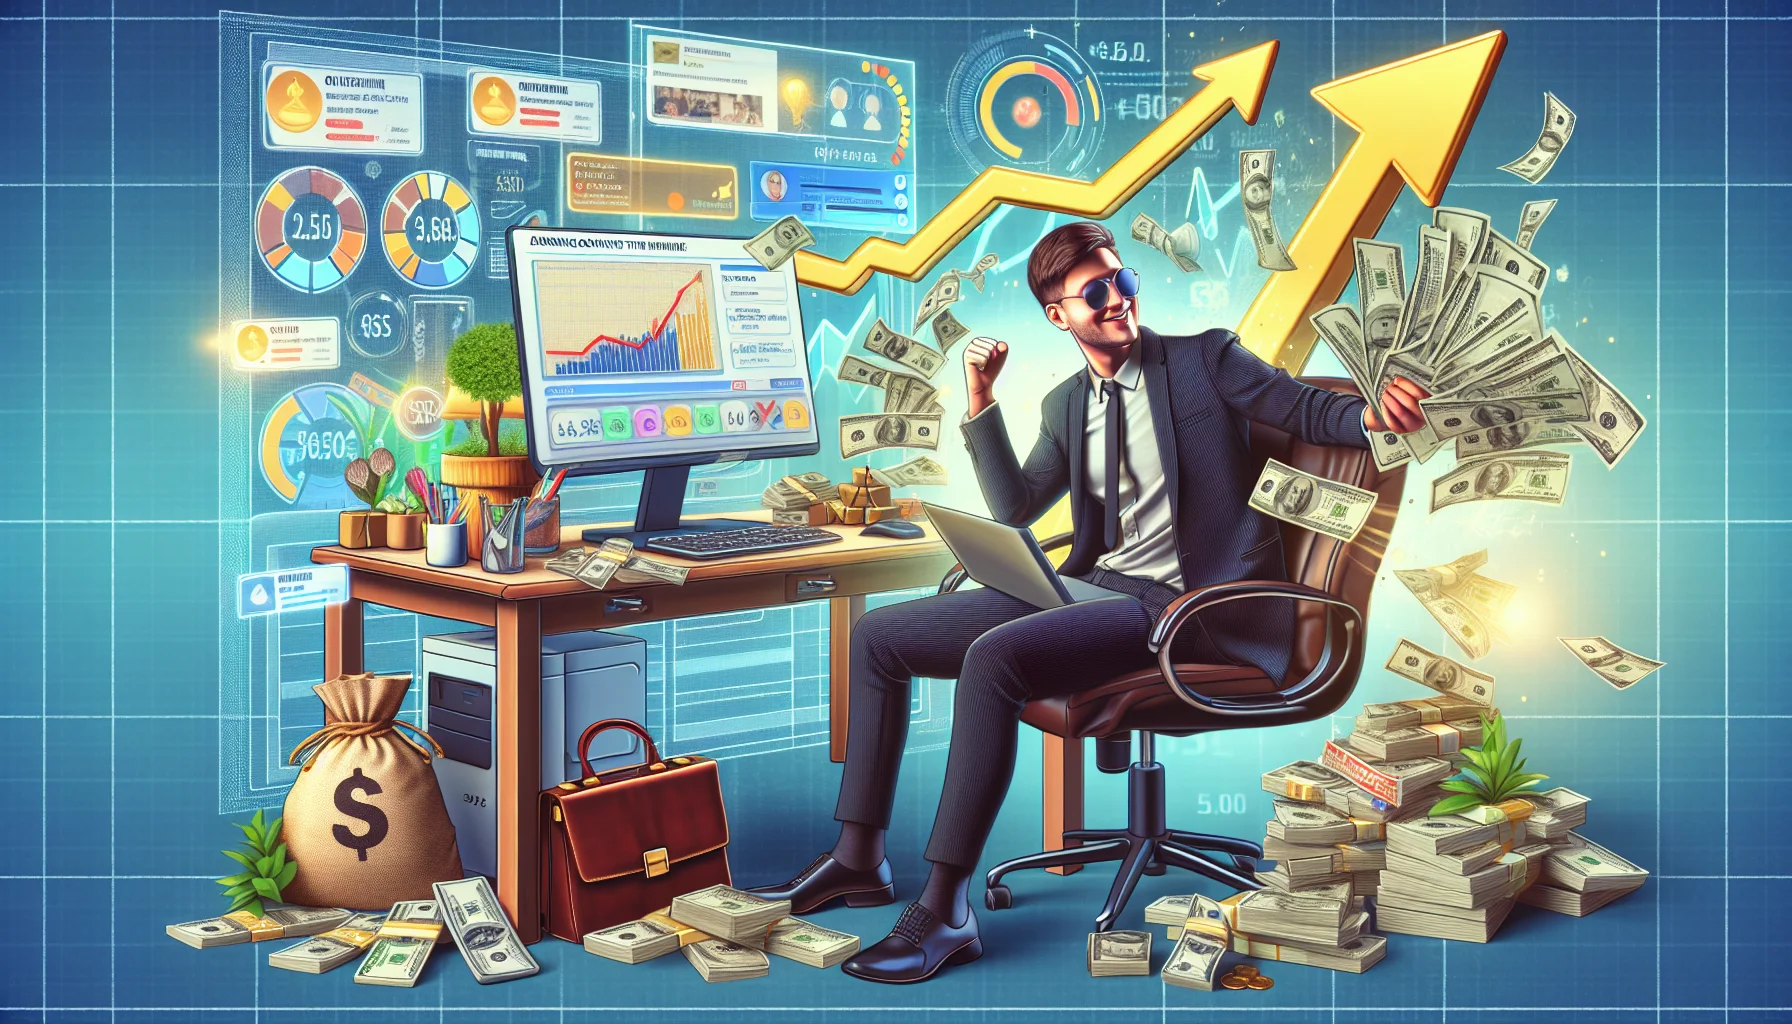 Generate a humorous and realistic image showcasing an online affiliate in an enticing scenario related to earning money over the internet. The affiliate can be represented as a person sitting in front of a computer station adorned with money and luxury items, showing the success of their online revenue stream. Add elements such as a growing progress bar, vibrant infographics and an incoming stream of notifications to show the ongoing increase in earnings. Make the overall ambiance feel positive, light-hearted and attractive, illustrating the exciting potential of online income.